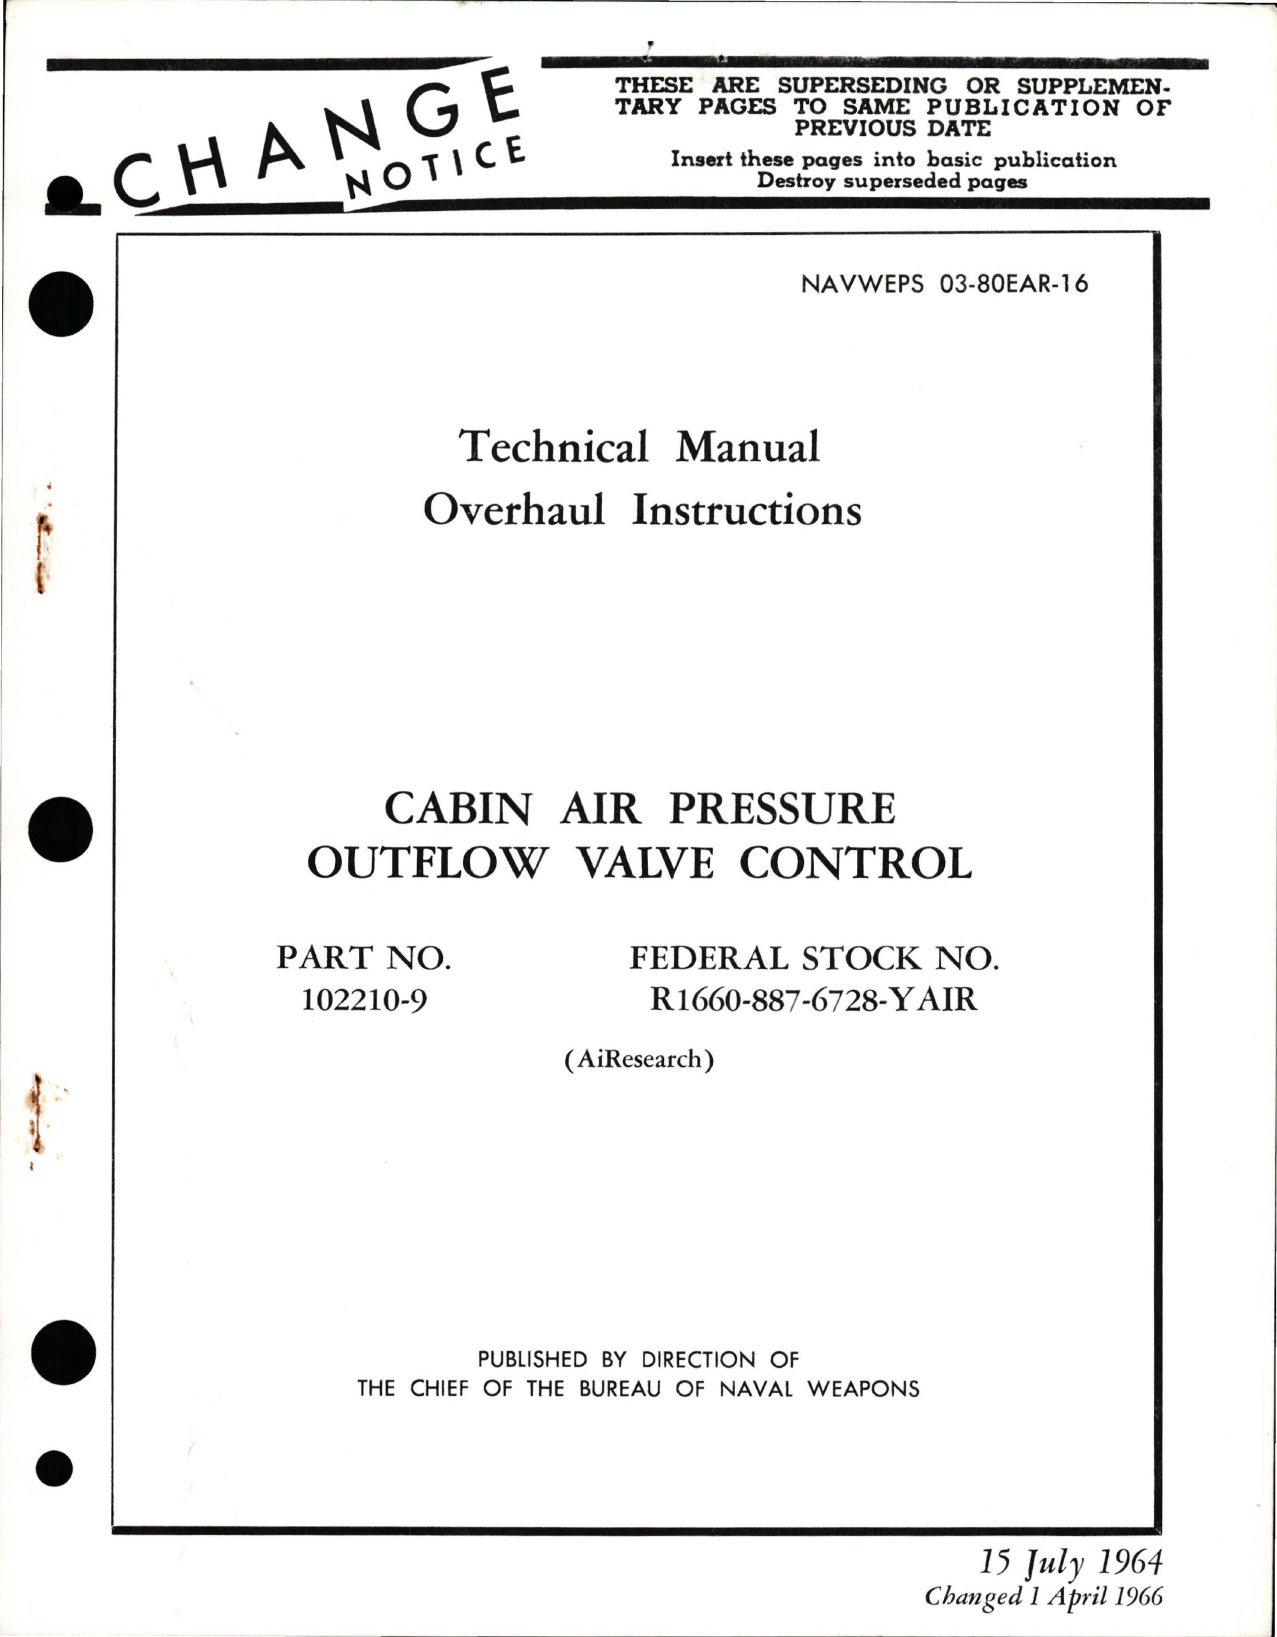 Sample page 1 from AirCorps Library document: Overhaul Instructions for Cabin Air Pressure Outflow Valve Control - Part 102210-9